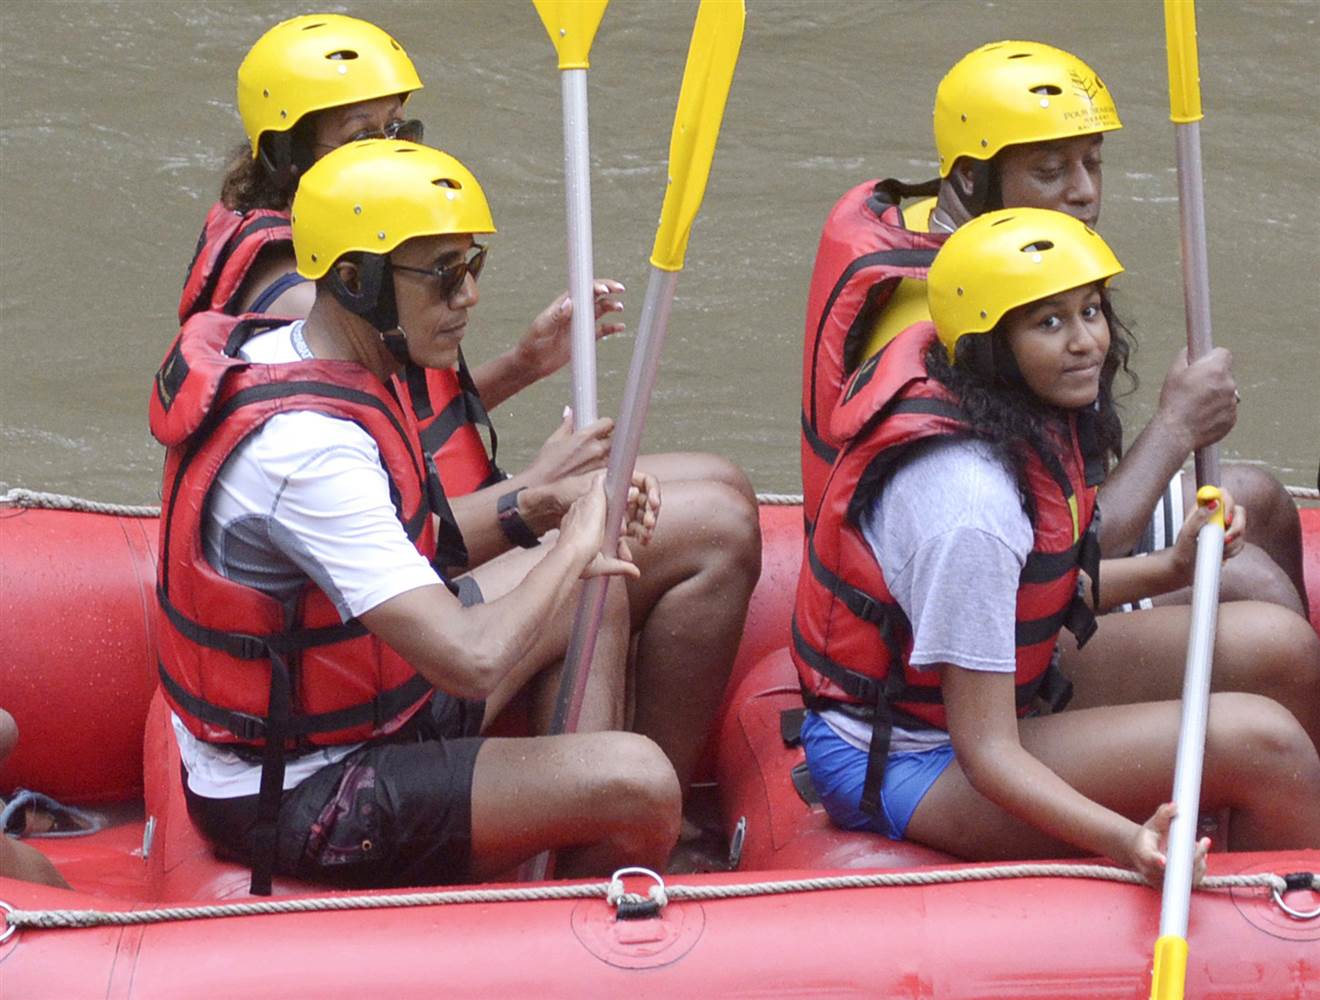 President Obama and family go river rafting in Indonesia | 3CHICSPOLITICO